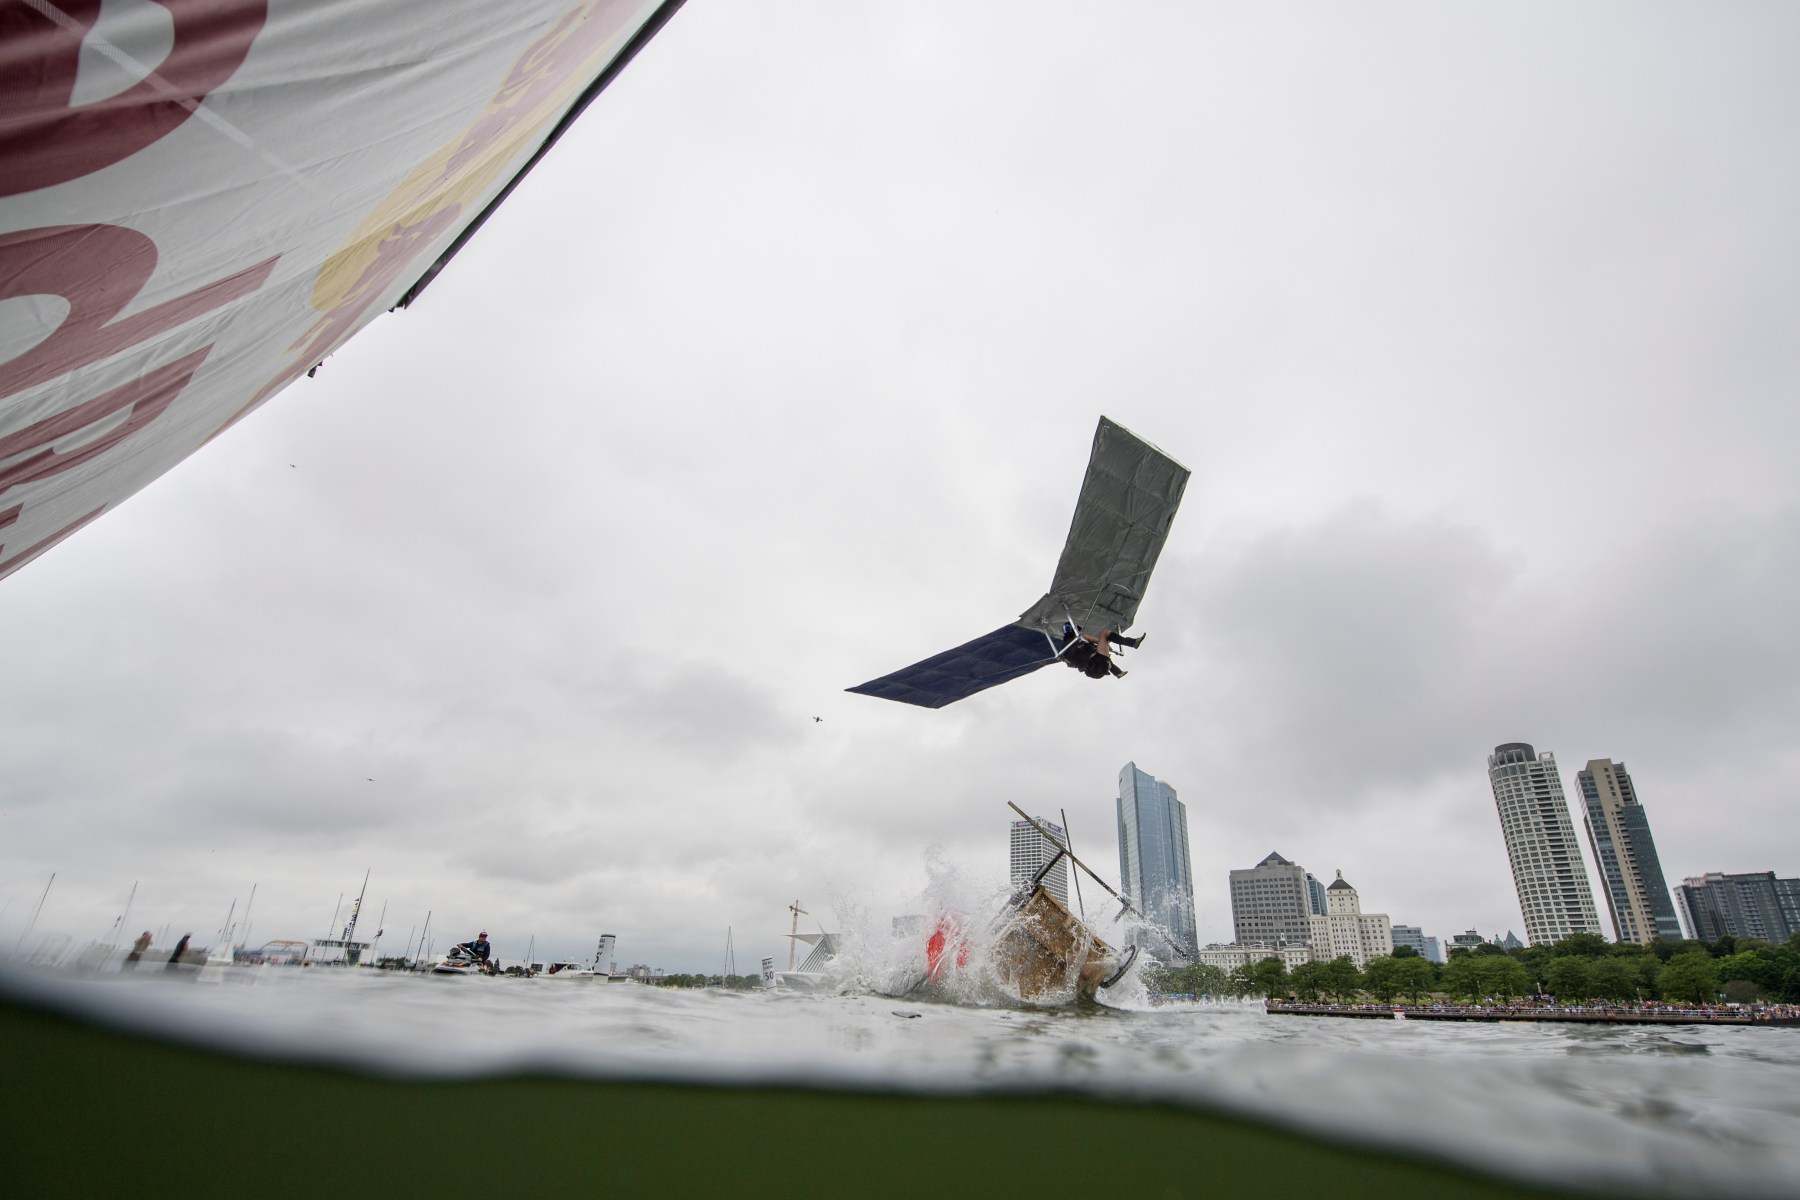 In July, Red Bull competition veterans Flight For Your Right to Party and their Viking-inspired craft were declared champions of Red Bull Flugtag Milwaukee with a remarkable jump of 66 feet and a perfect 50 from the judges' panel.